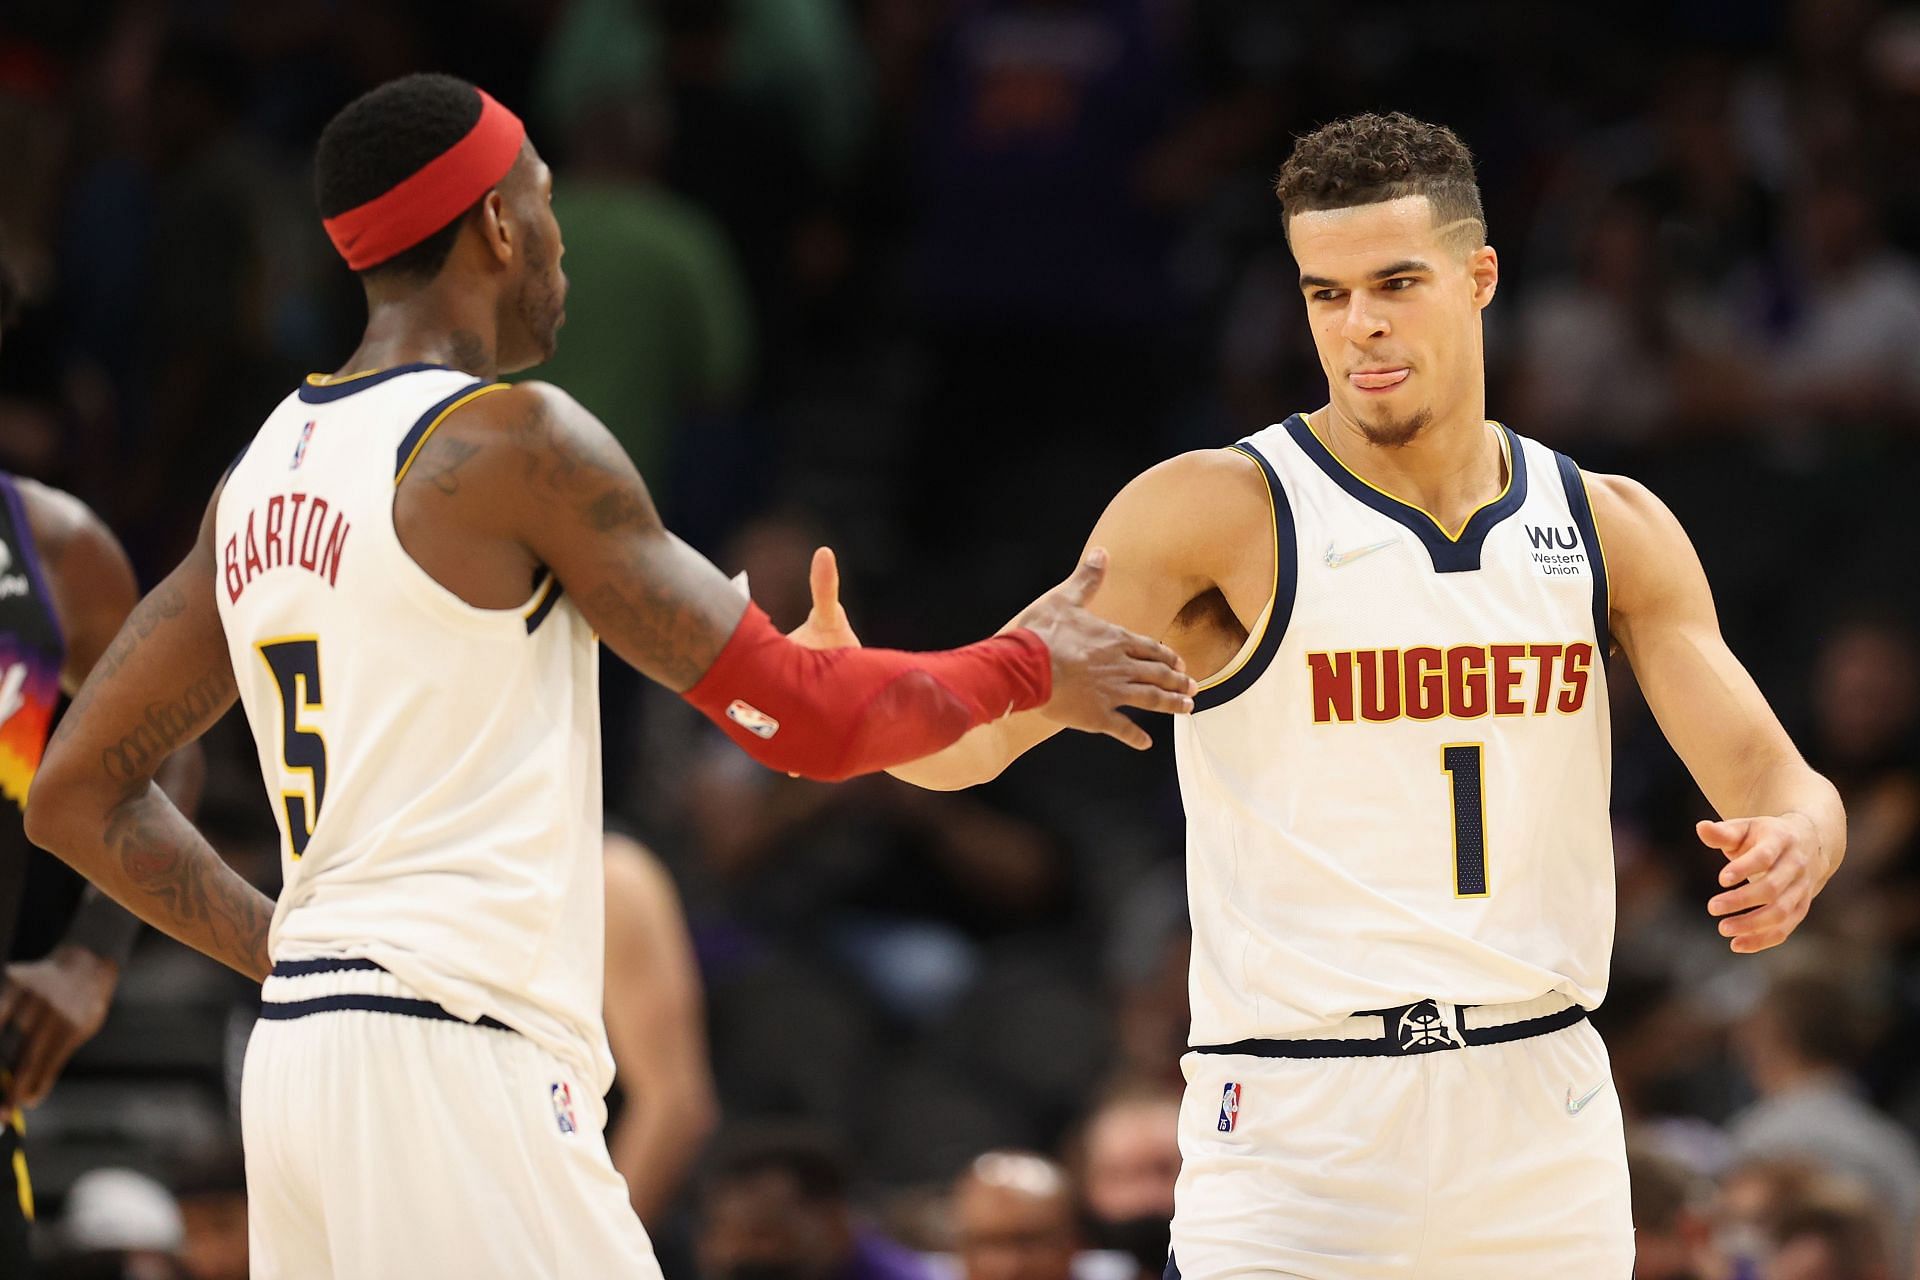 Michael Porter Jr. #1 and Will Barton #5 of the Denver Nuggets celebrate after defeating the Phoenix Suns